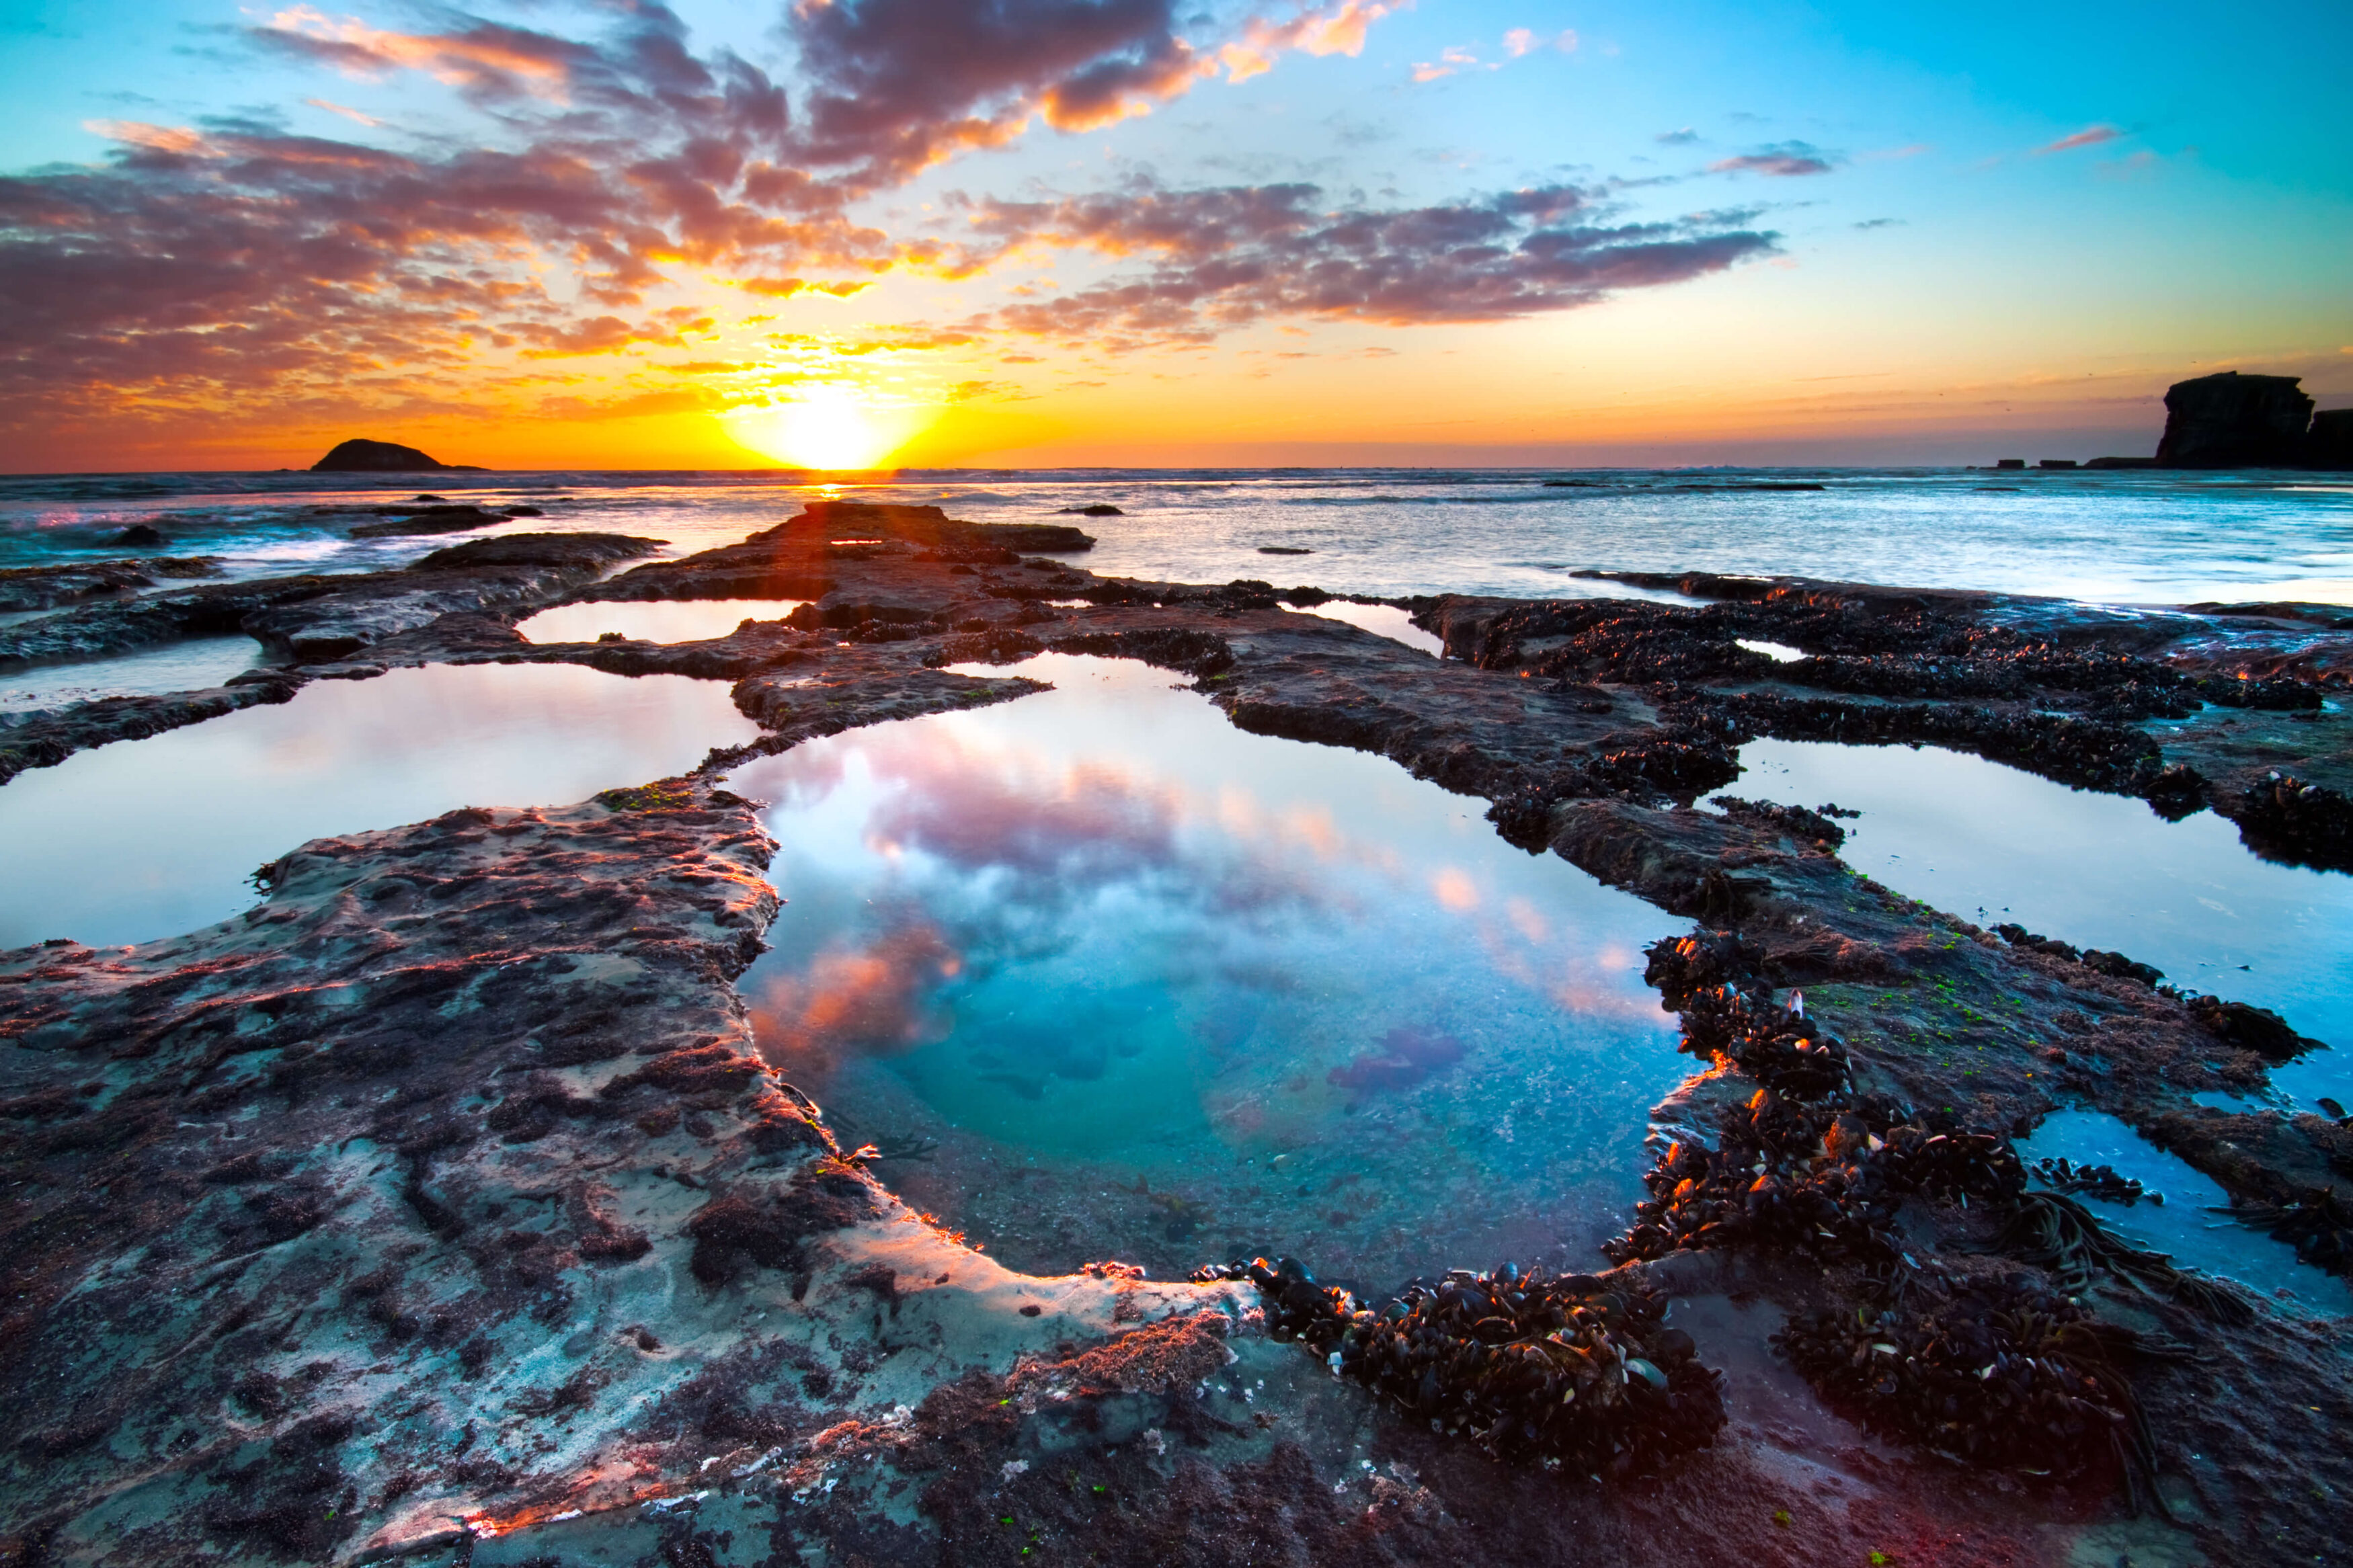 An image of the sunset and the clouds reflected on the ocean life